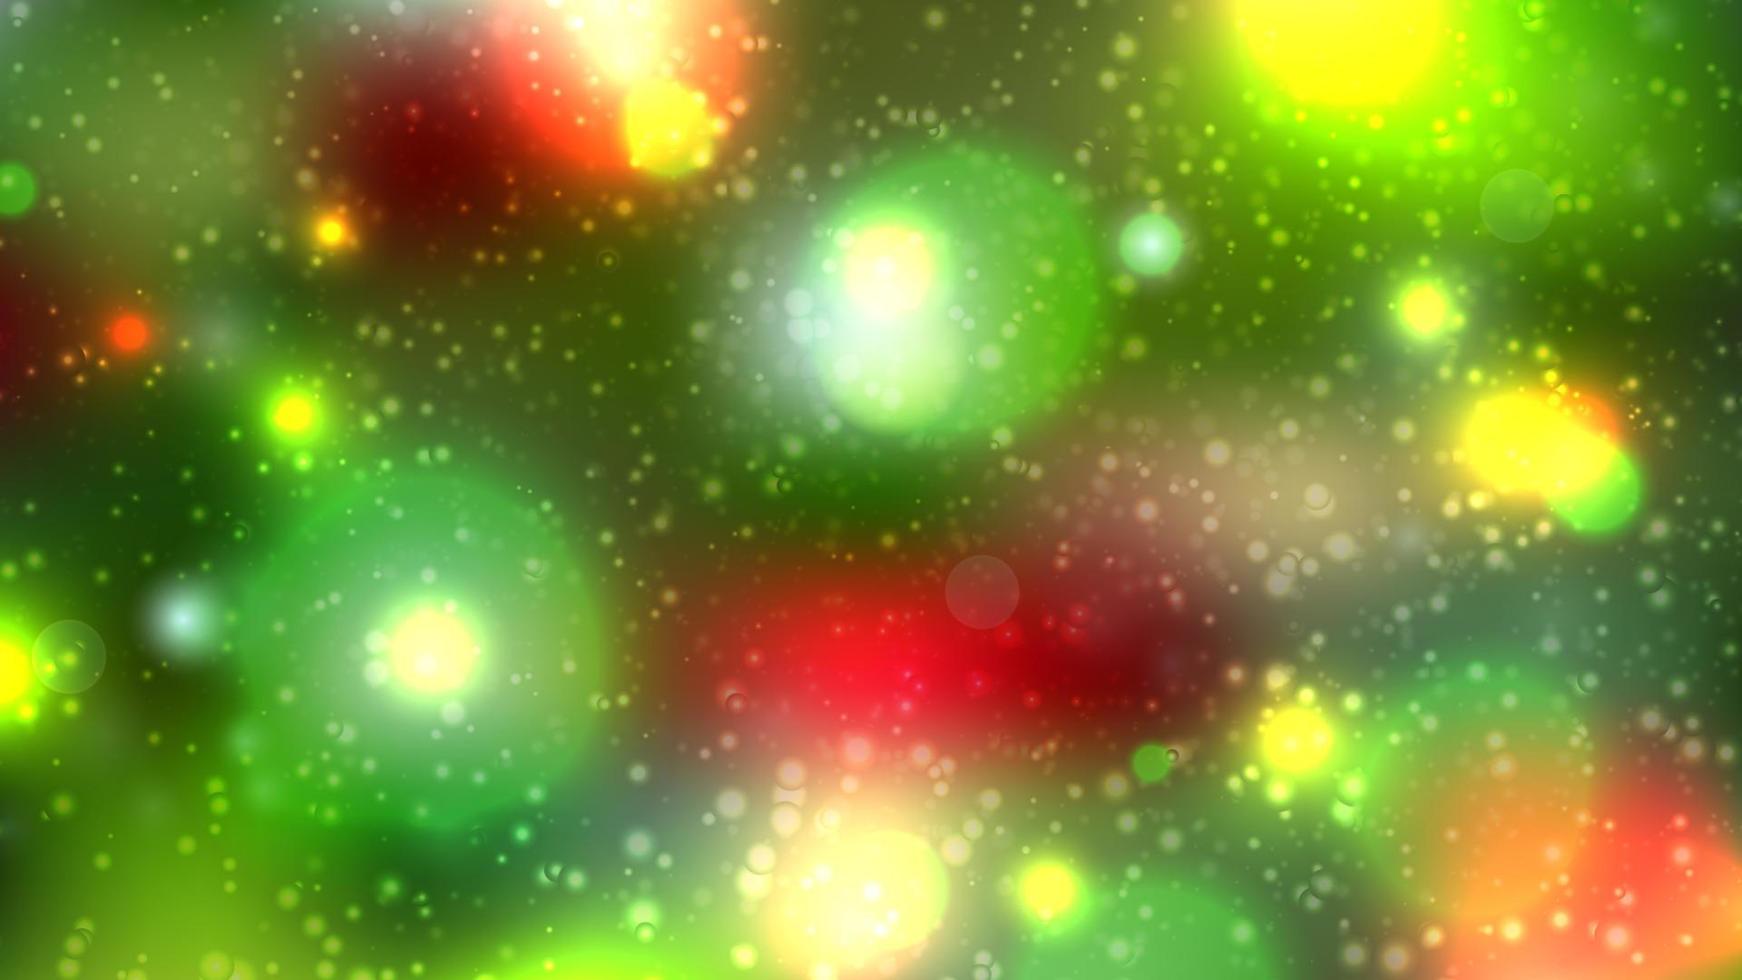 Red-green Christmas background with bokeh lights. Bright highlights. vector illustration